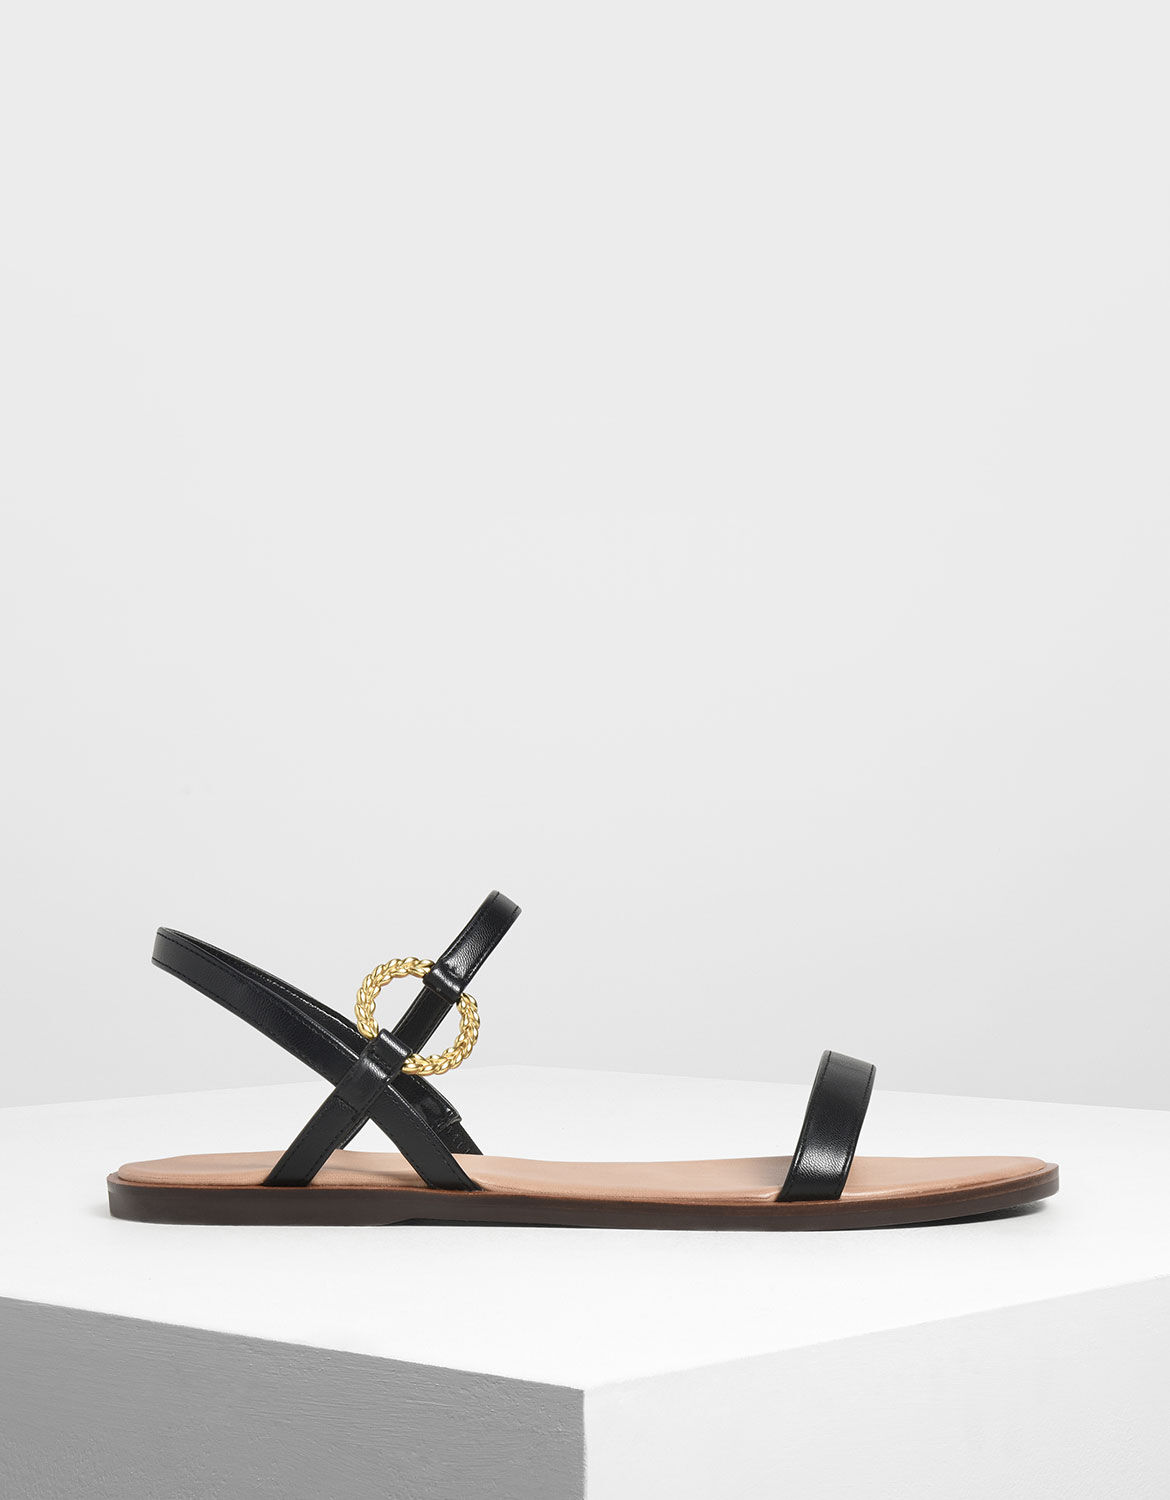 Women's Sandals | Shop Exclusive Styles | CHARLES & KEITH KR